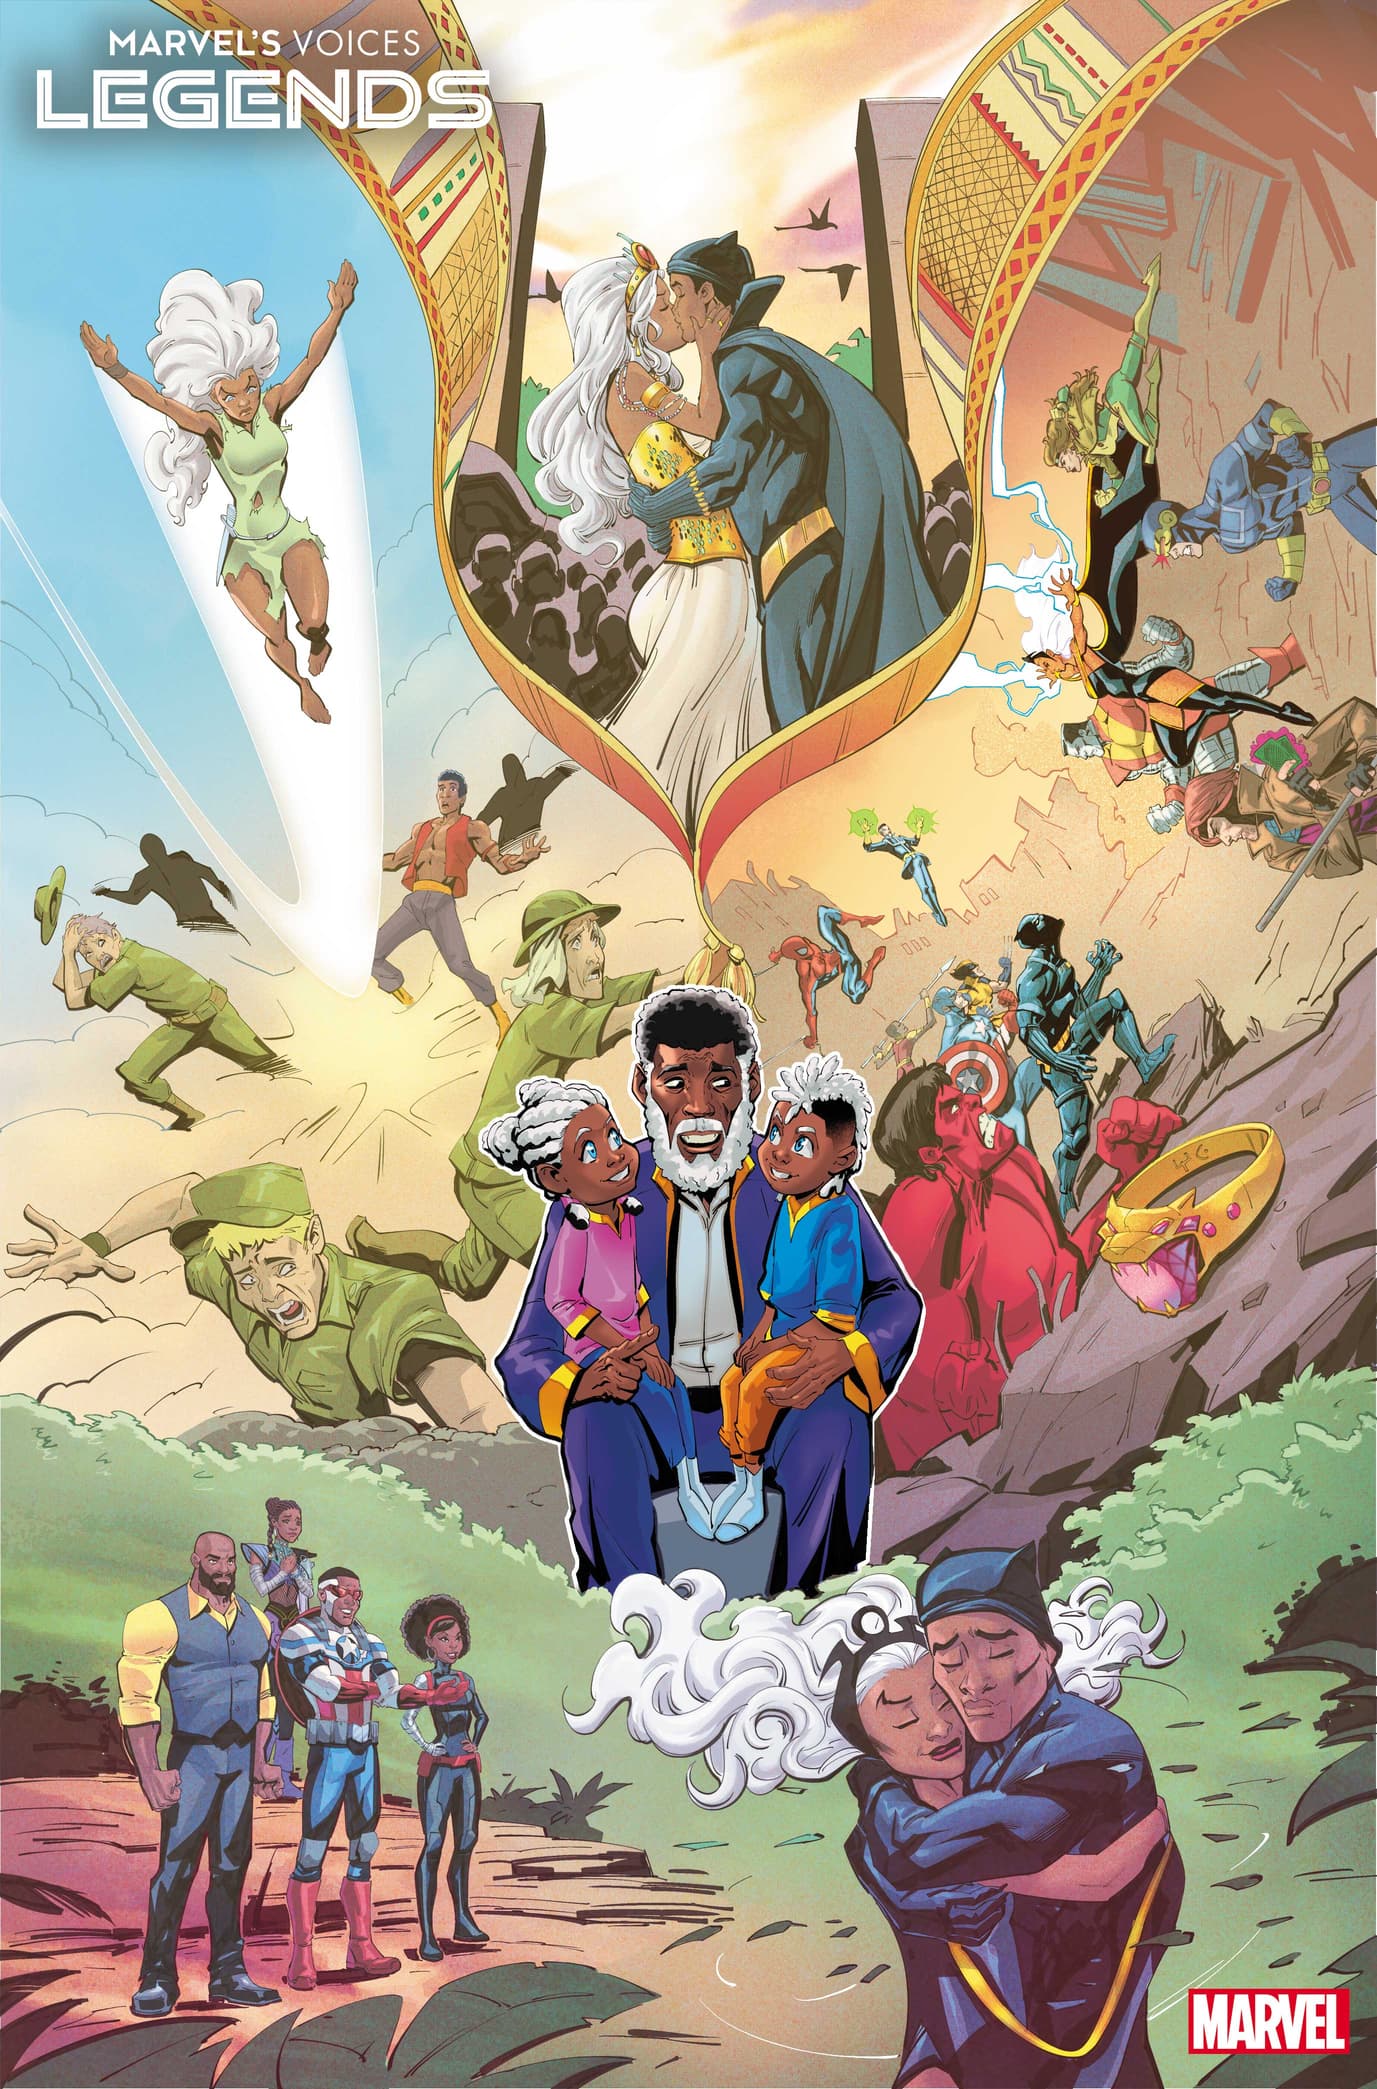 MARVEL’S VOICES: LEGENDS #1: 'The World Is Not Ready' artwork by Julian Shaw